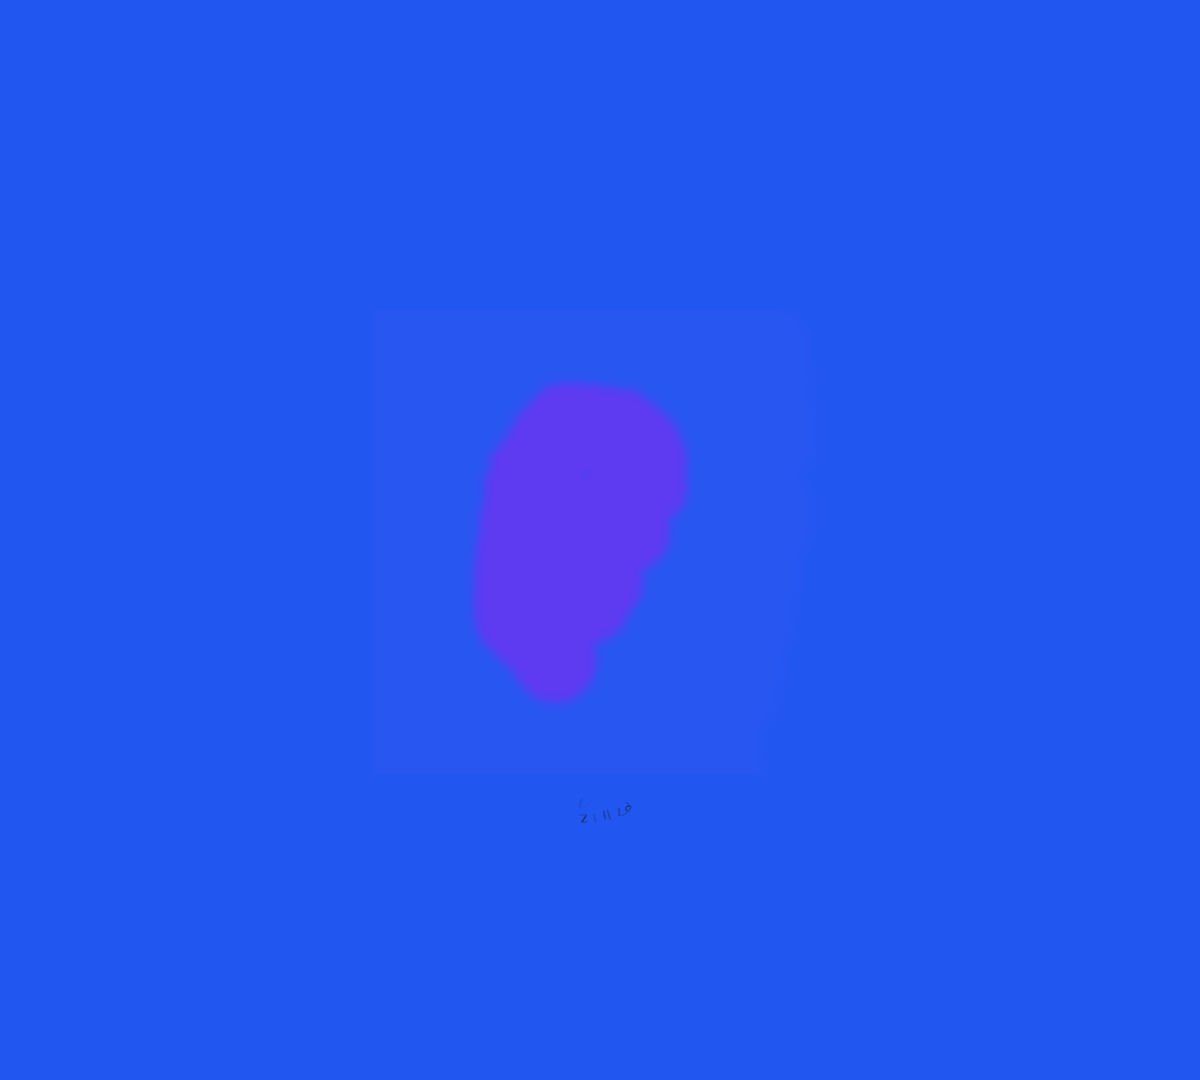 Wet browser painting in quick purple on a royal blue background.